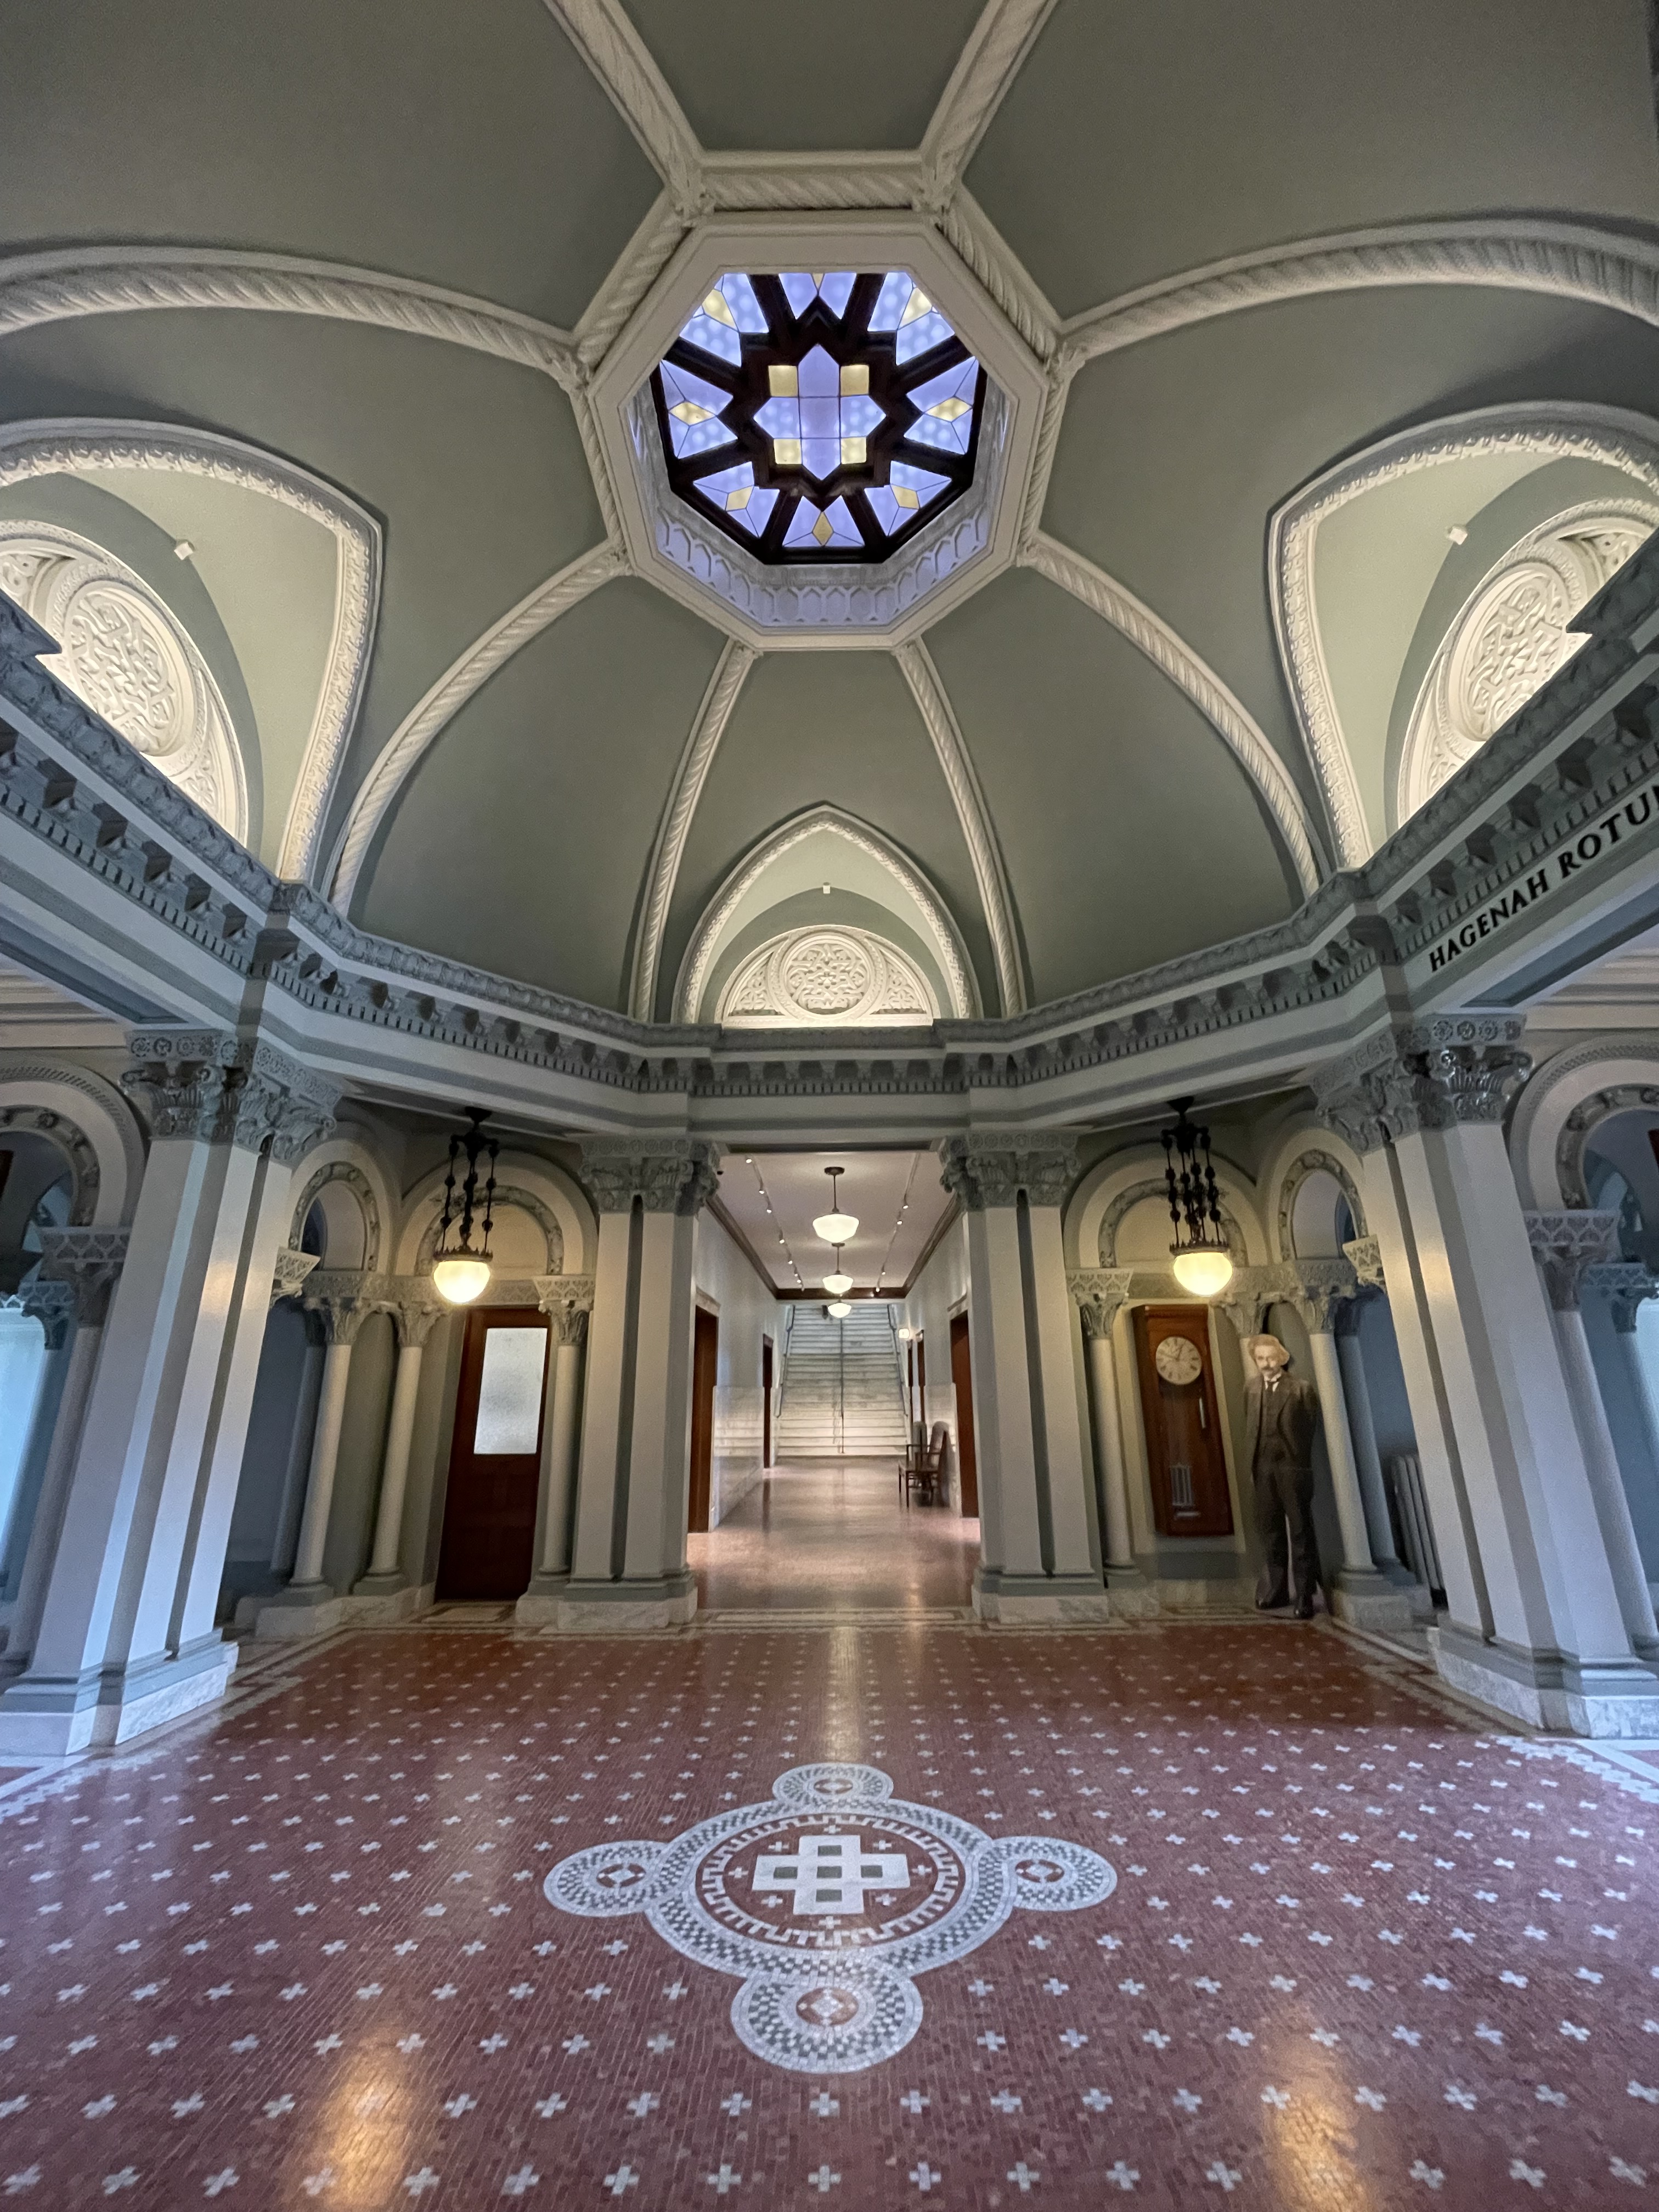 The entry Rotunda of Yerkes Observatory has been fully restored with the original marble mosaic floors.